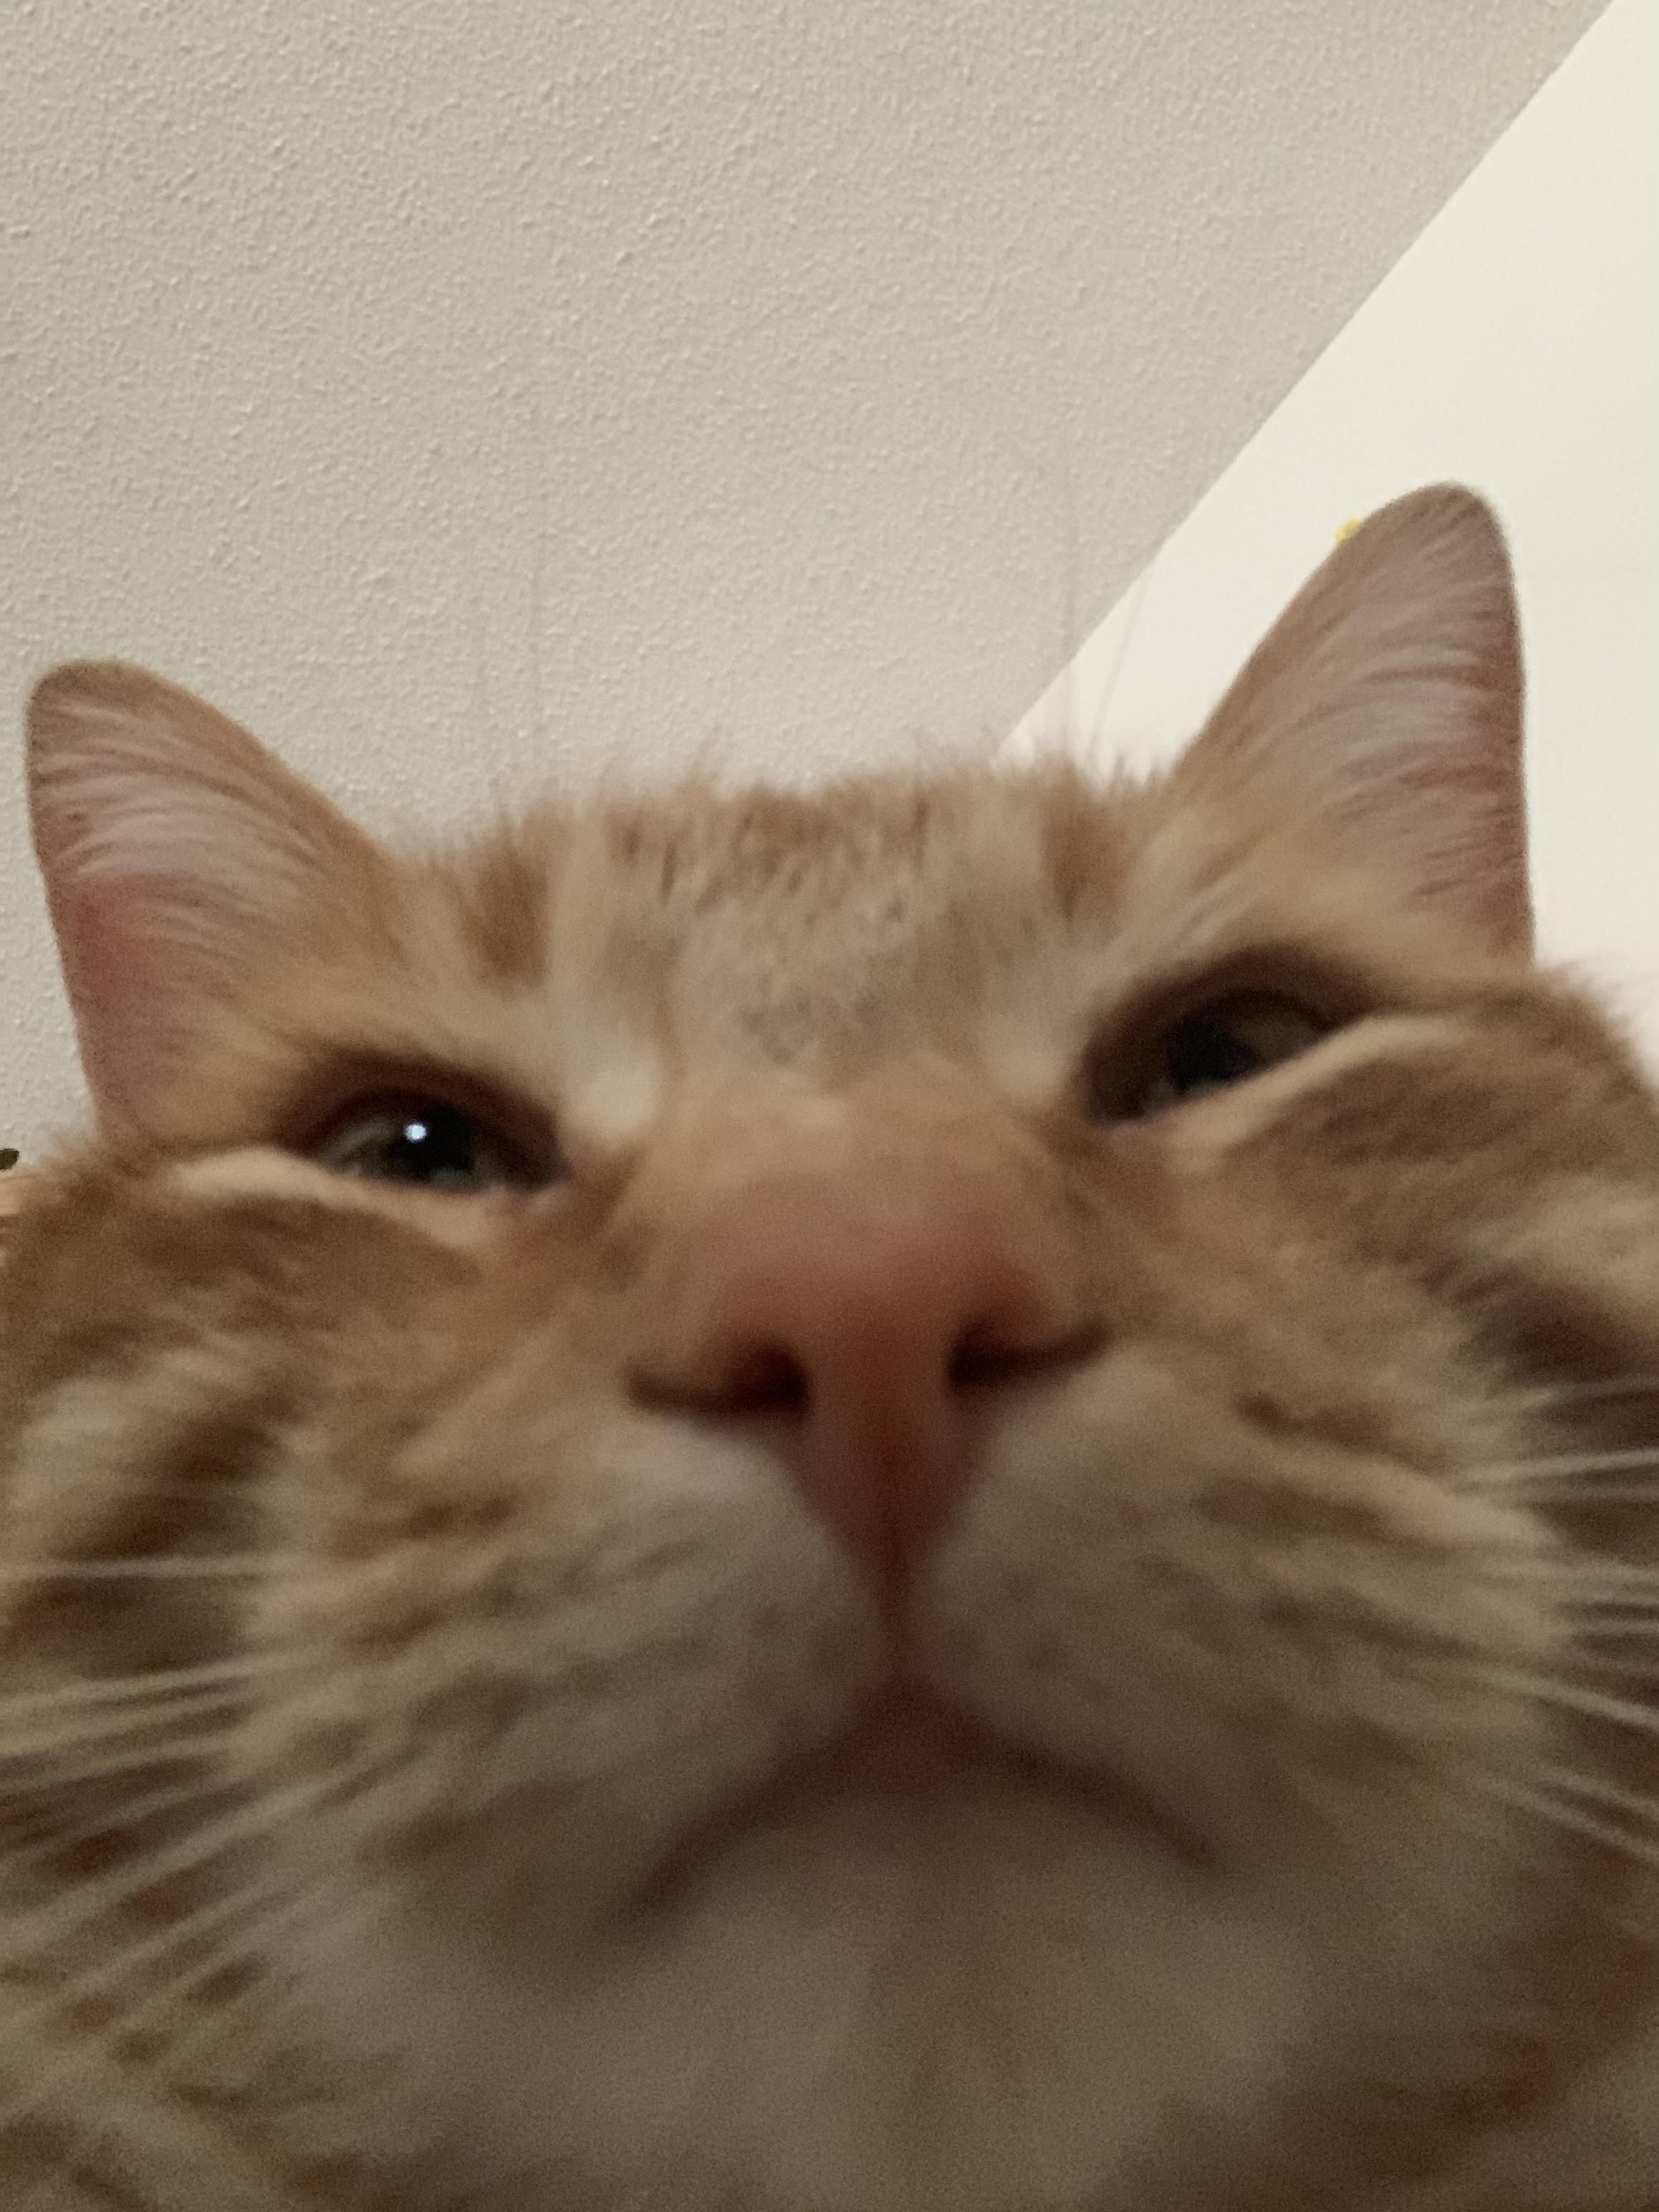 You got games on your phone?